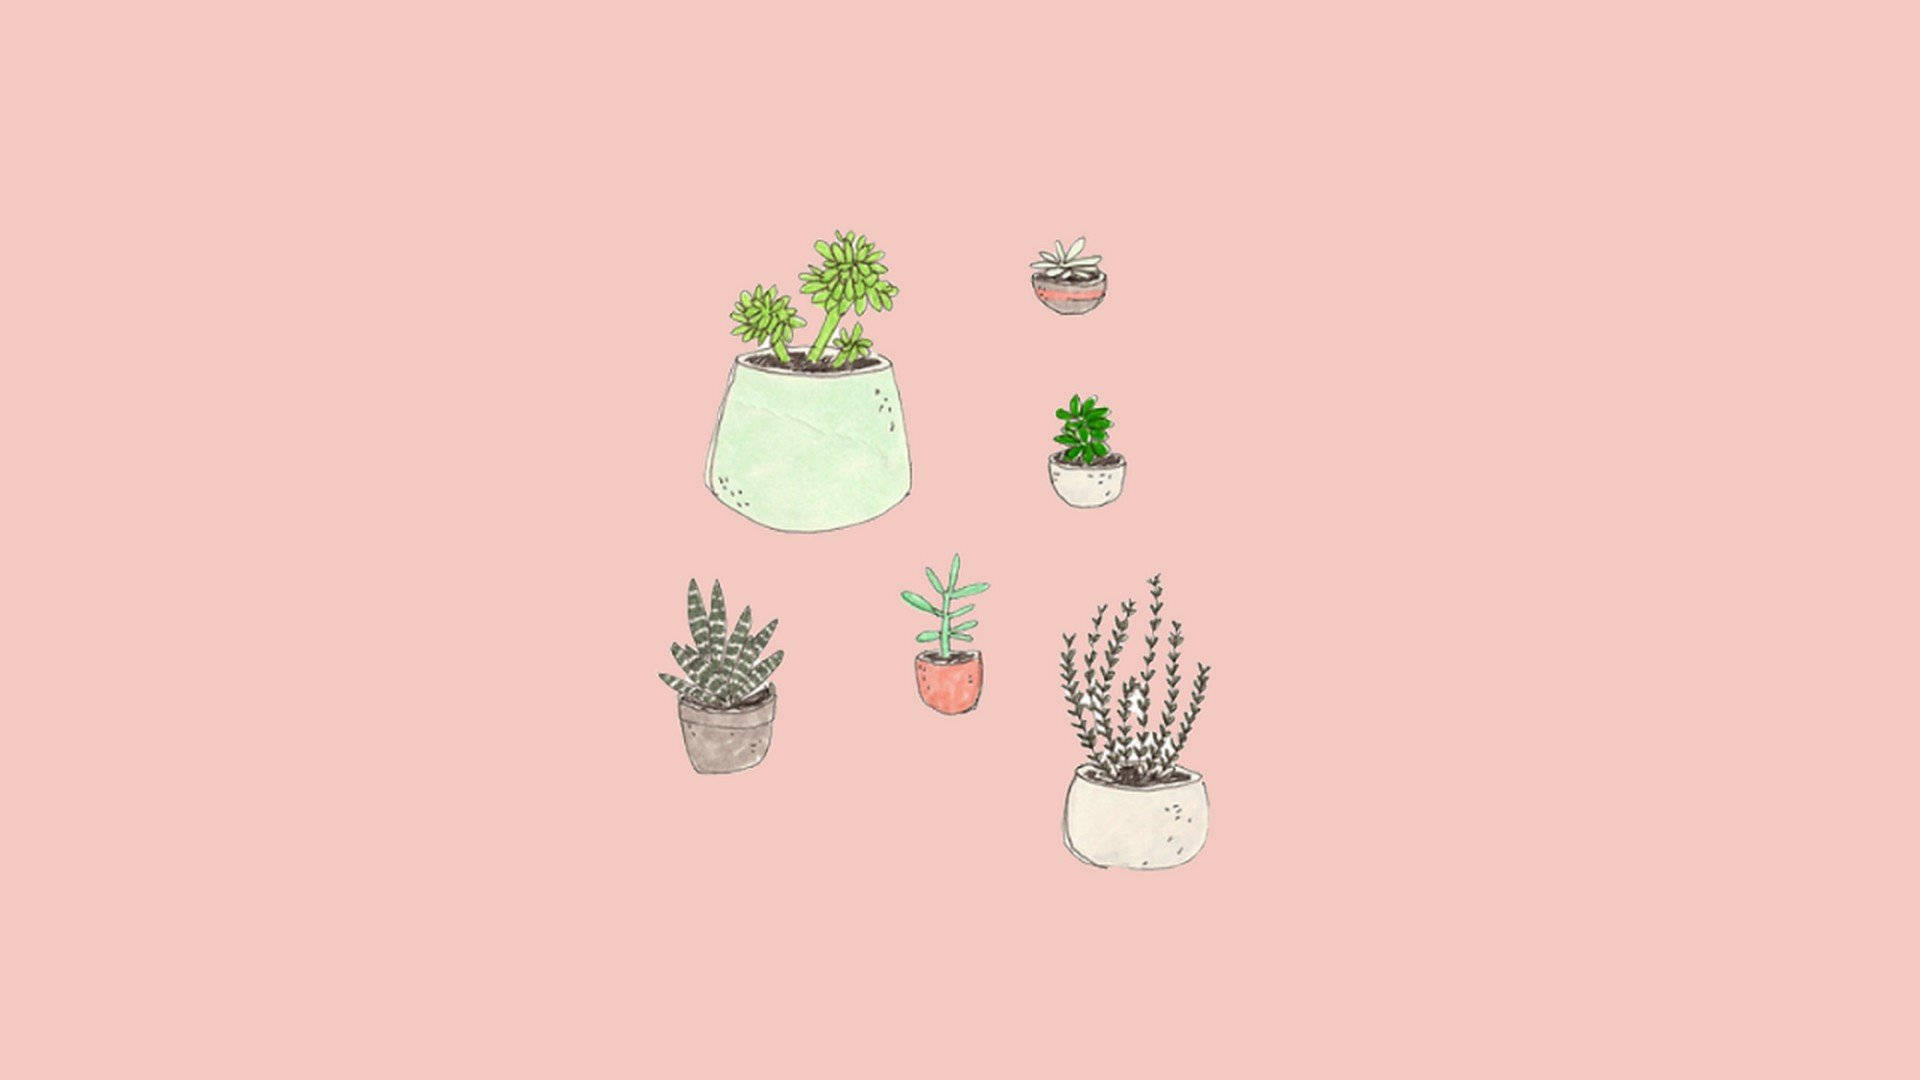 Embrace Tranquility - Lovely Potted Plant Collection In An Aesthetic Décor.